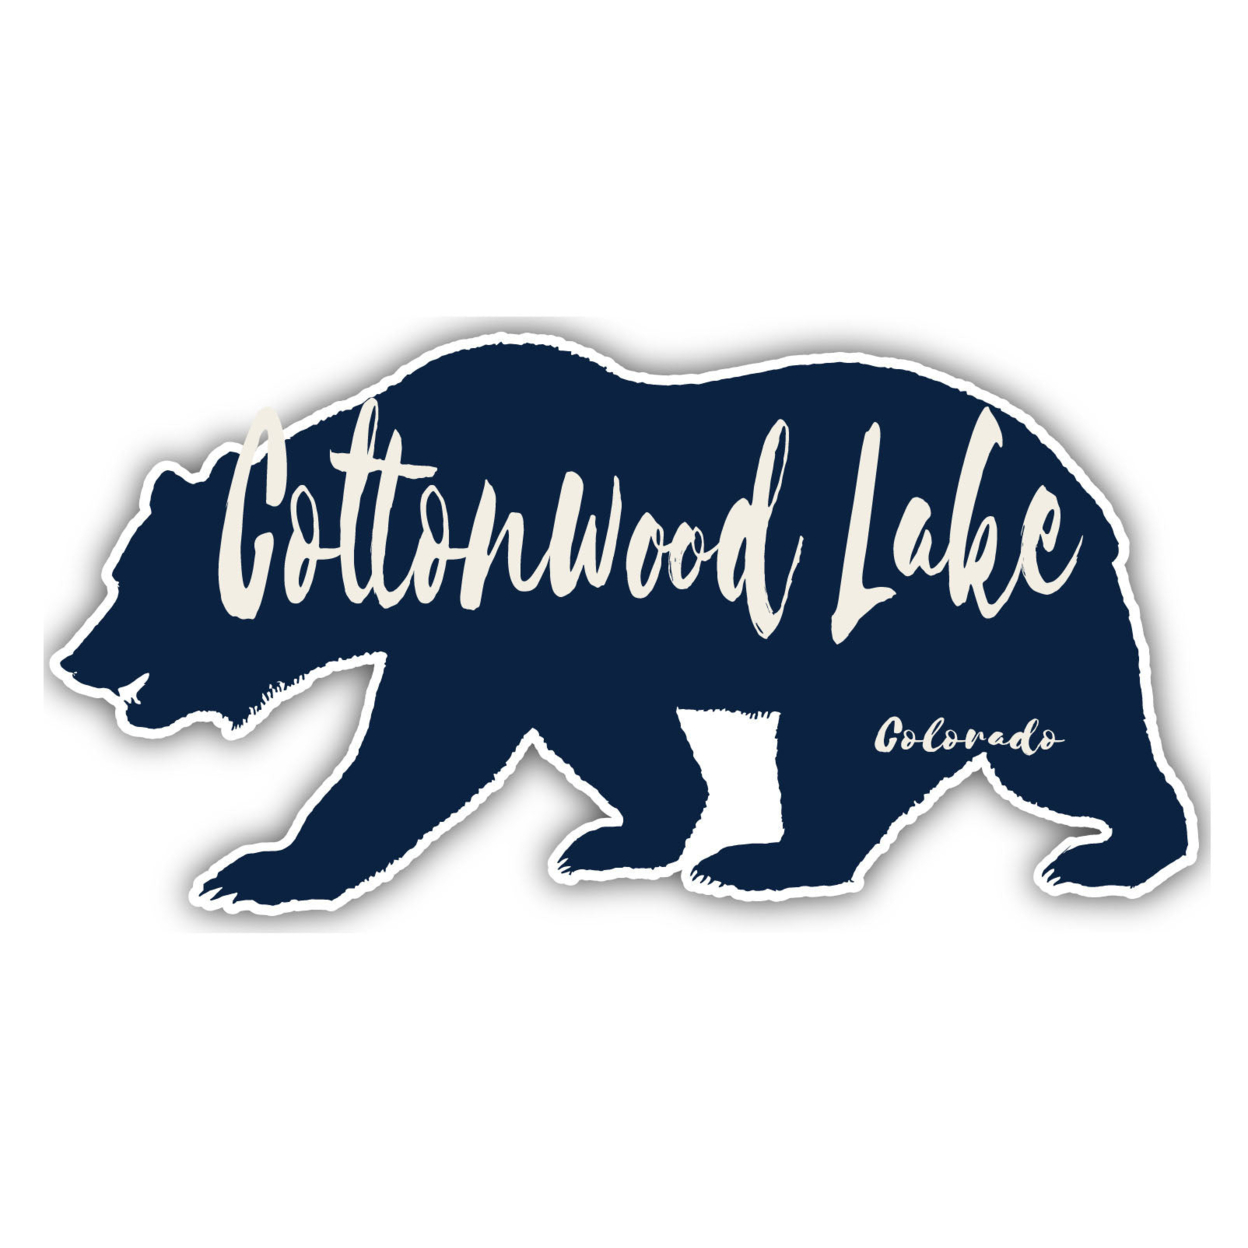 Cottonwood Lake Colorado Souvenir Decorative Stickers (Choose Theme And Size) - 4-Pack, 12-Inch, Tent